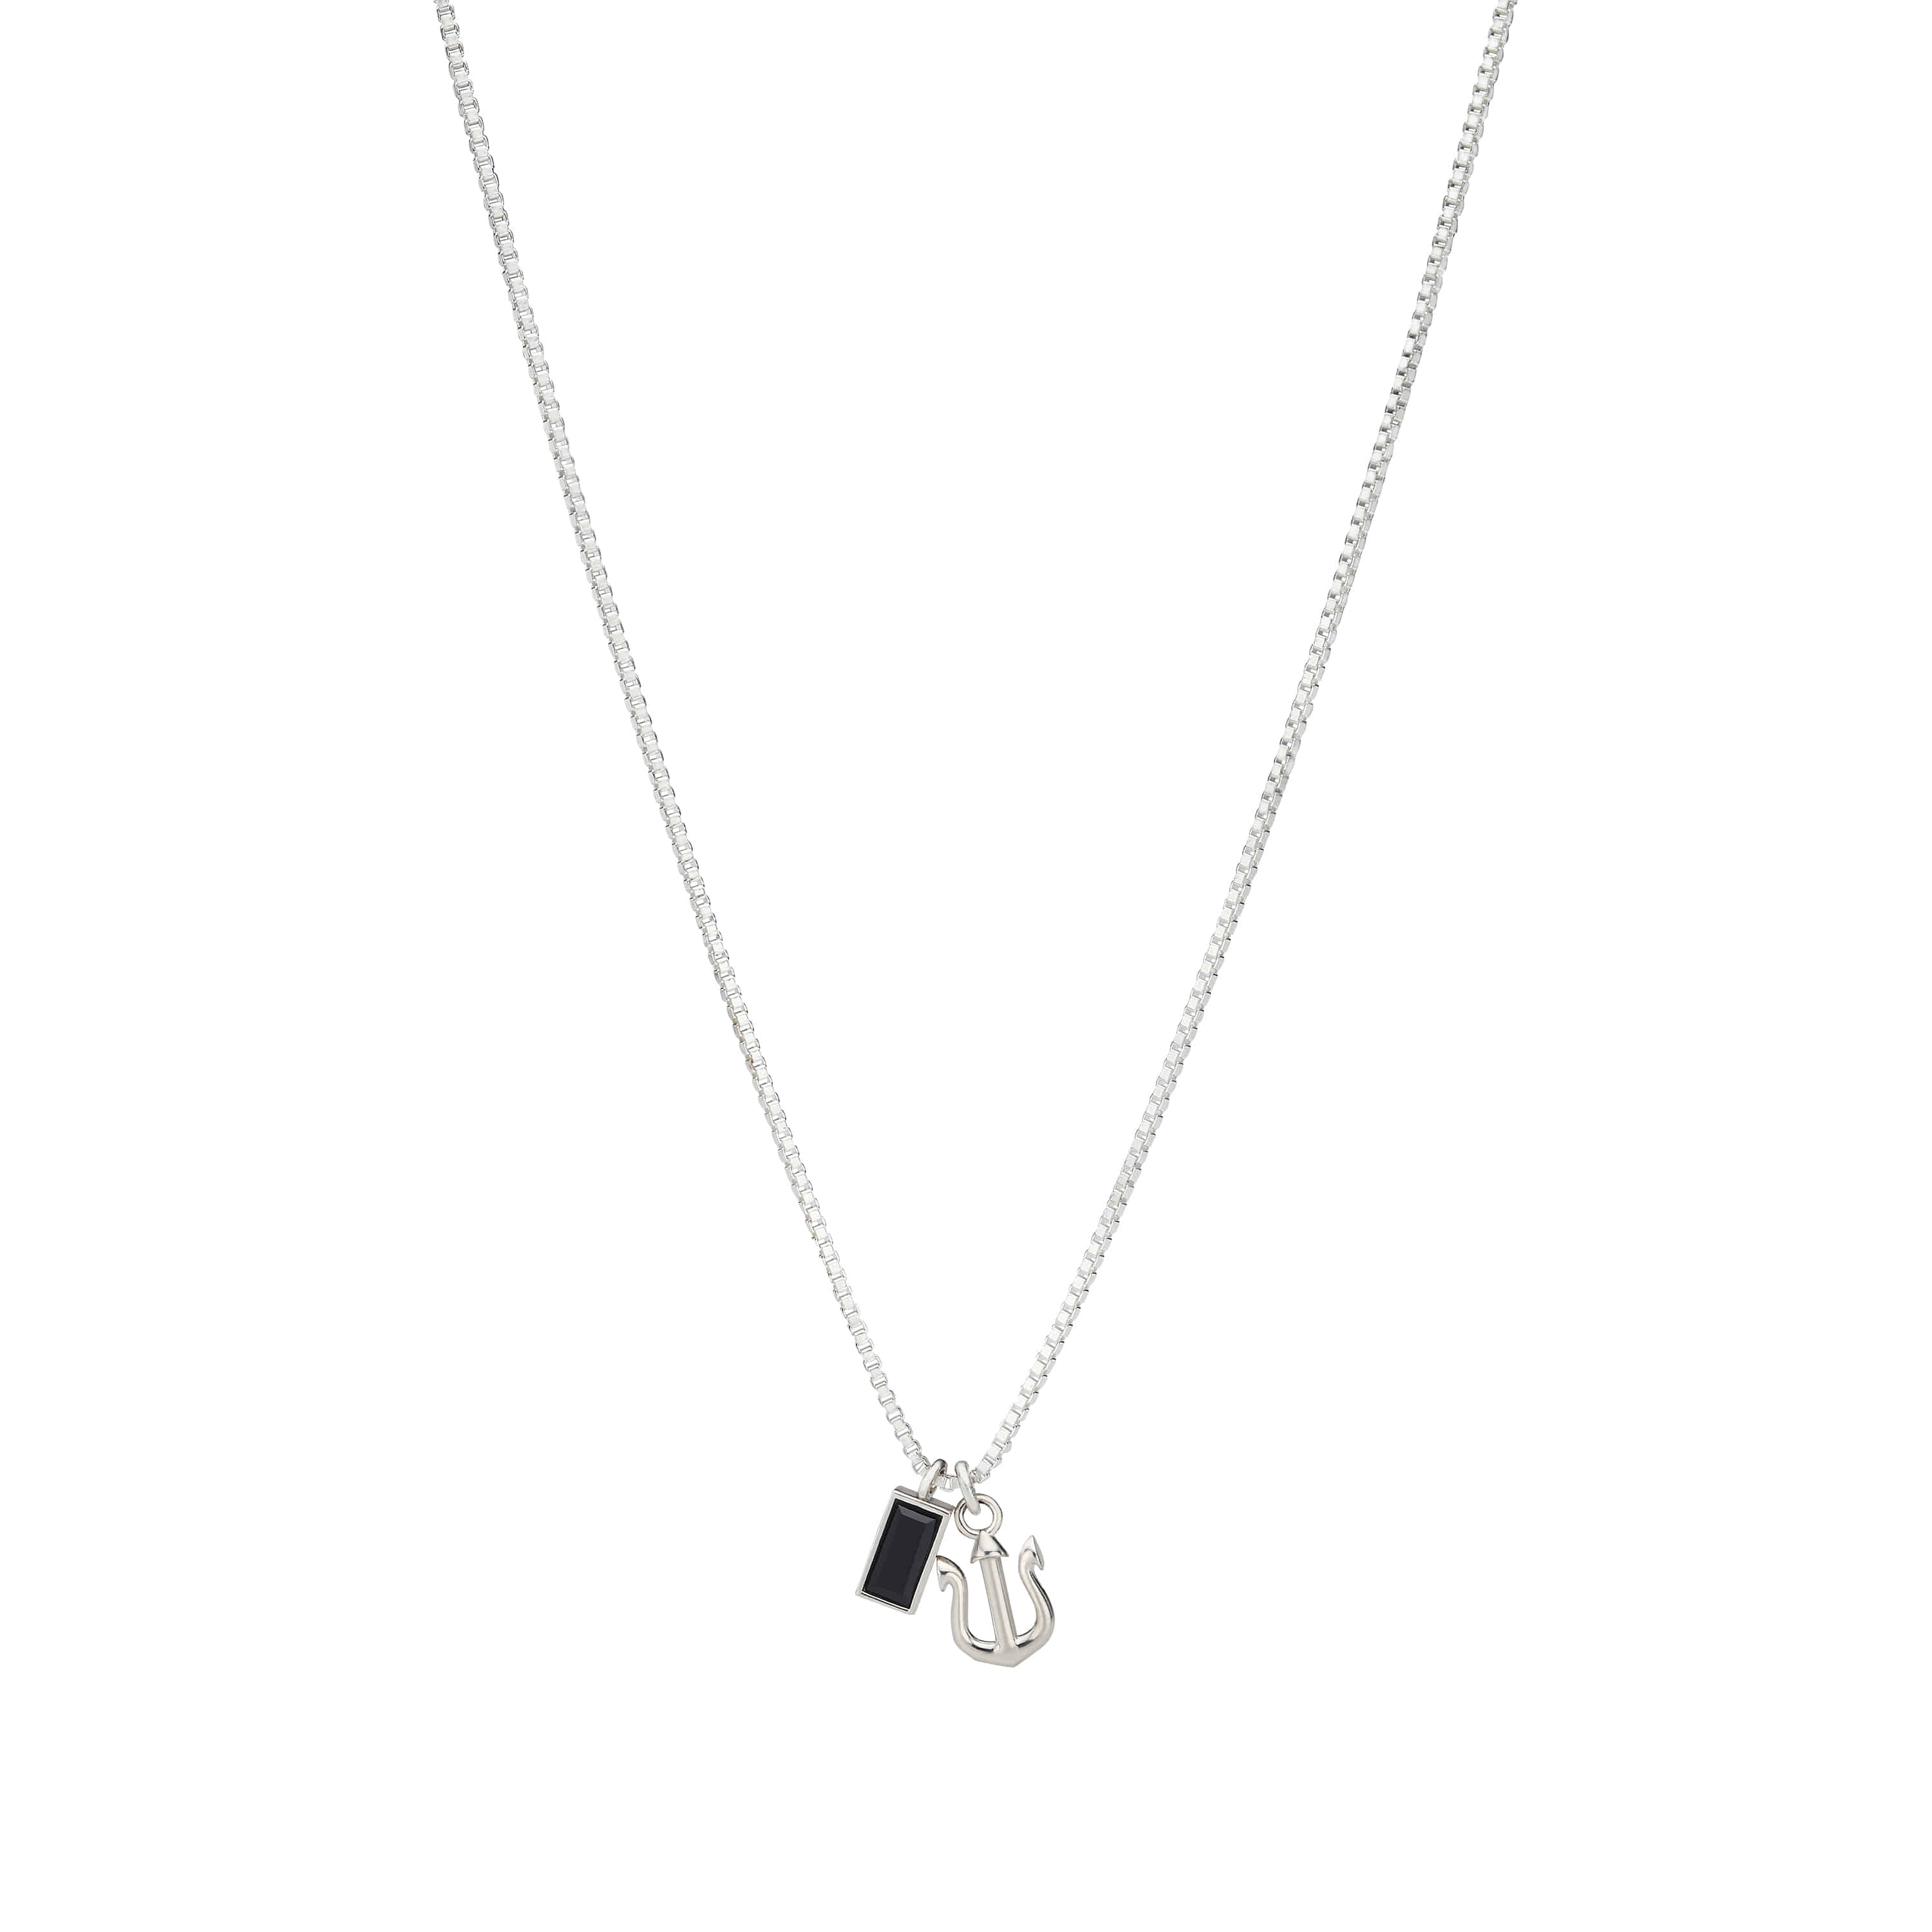 OXN009 : Black Trident Iayering Necklace